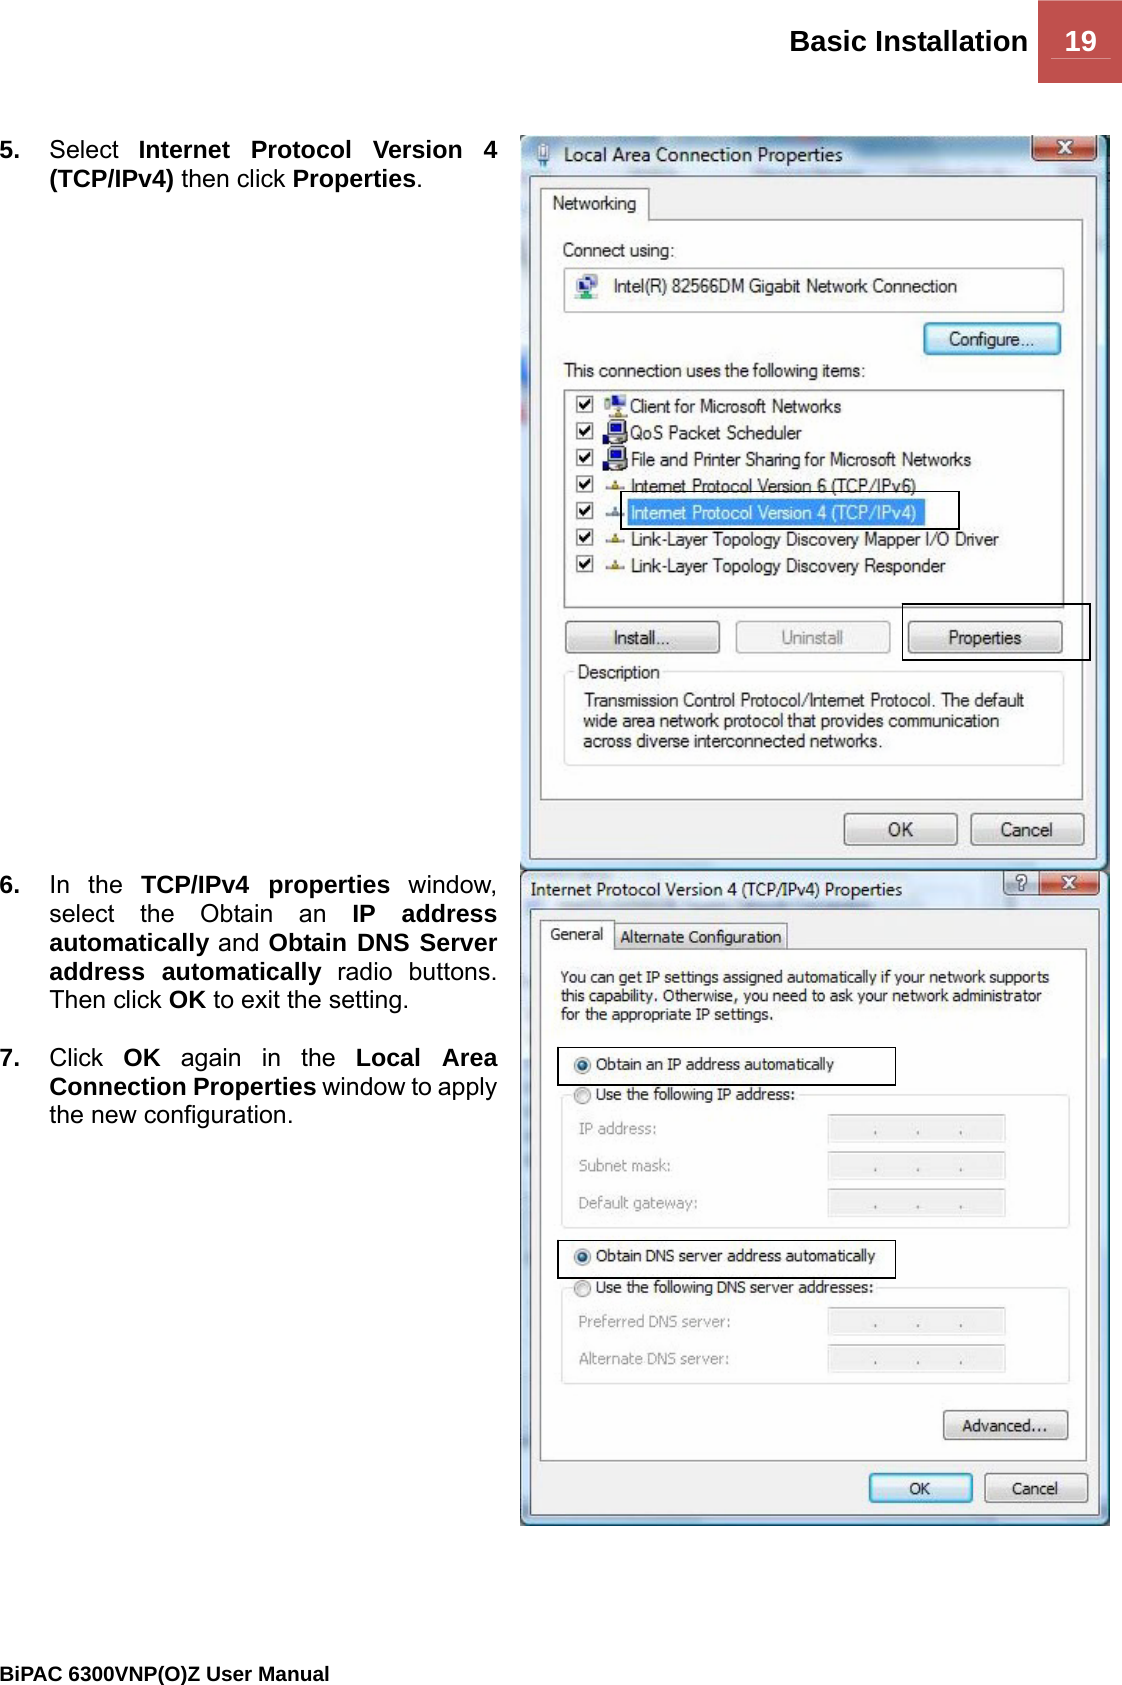 Basic Installation 19                                                BiPAC 6300VNP(O)Z User Manual   5.  Select  Internet Protocol Version 4 (TCP/IPv4) then click Properties. 6.  In the TCP/IPv4 properties window, select the Obtain an IP address automatically and Obtain DNS Server address automatically radio buttons. Then click OK to exit the setting.  7.  Click  OK again in the Local Area Connection Properties window to apply the new configuration. 